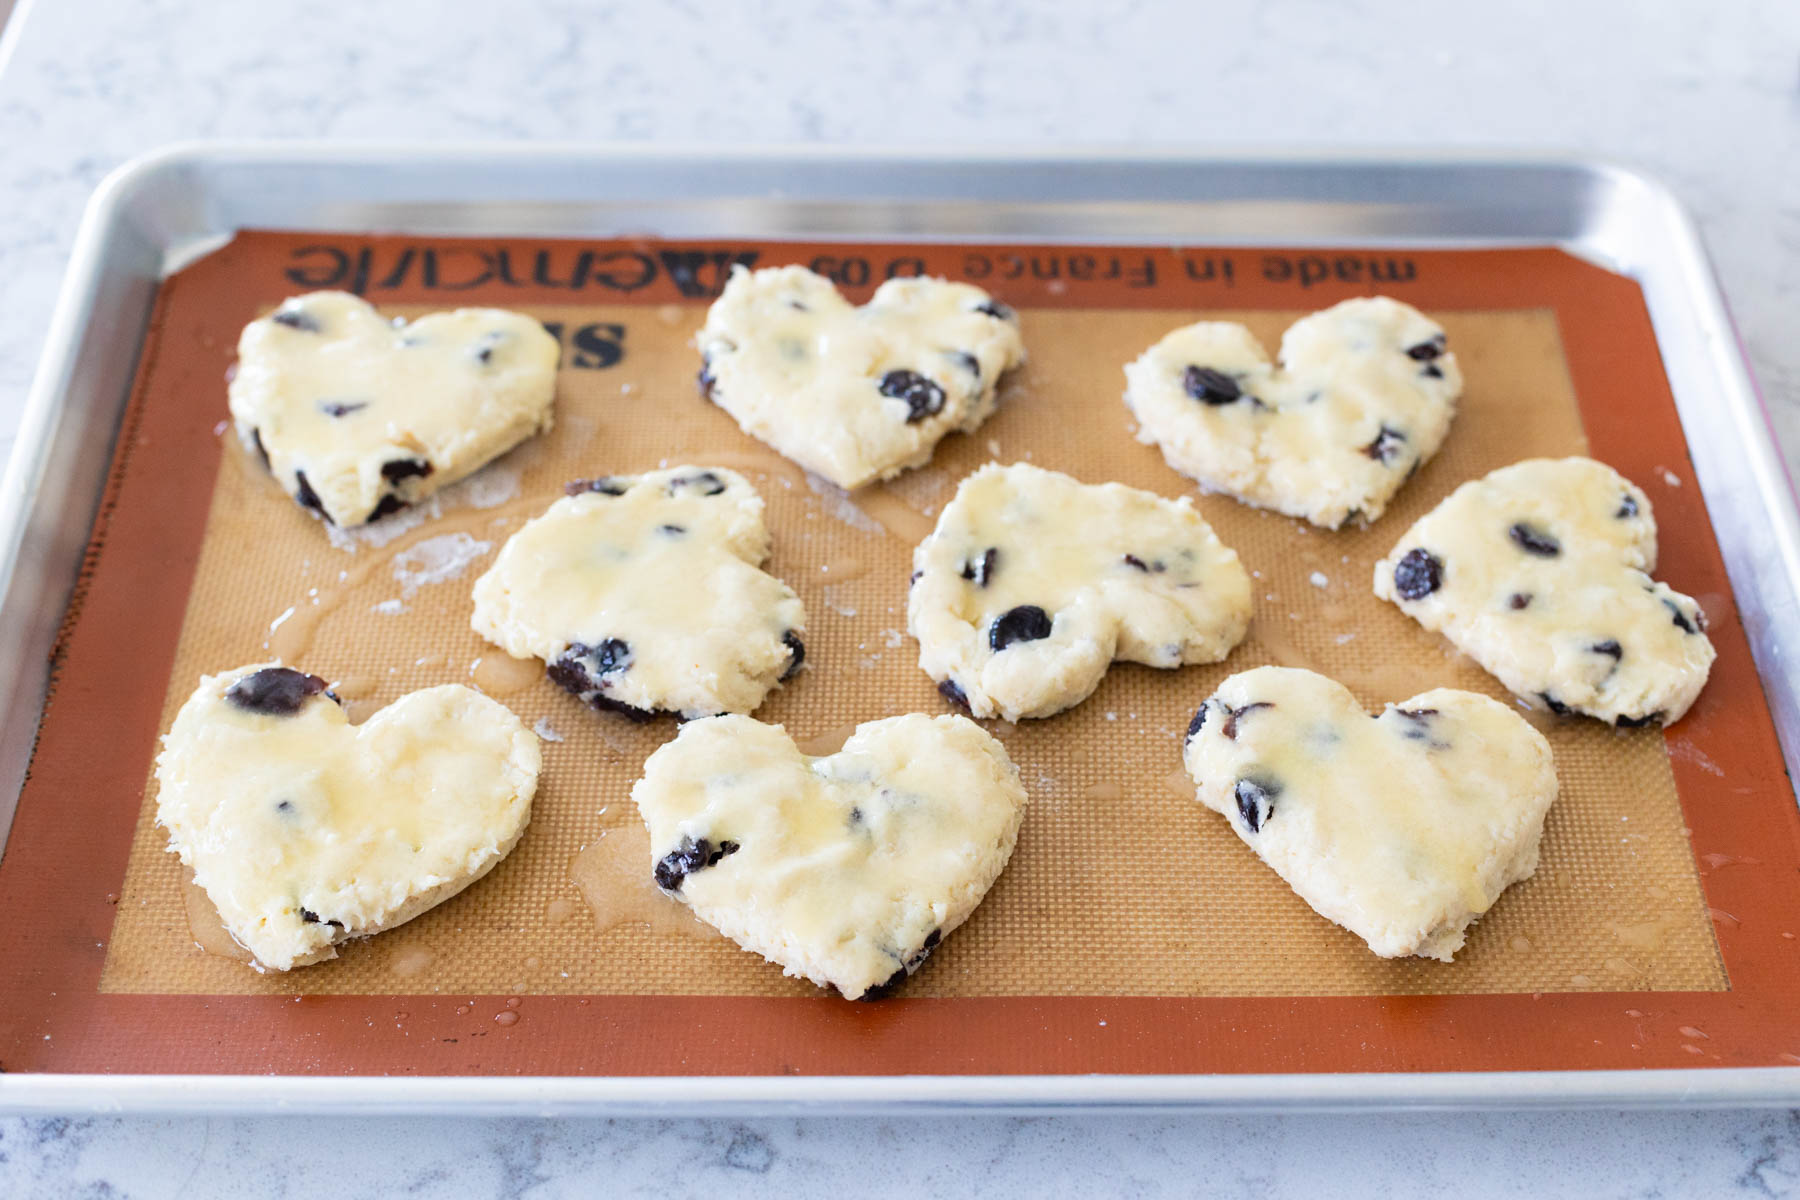 The scones have been cut into heart shapes and brushed with melted butter on a baking sheet lined with a silicone baking mat.